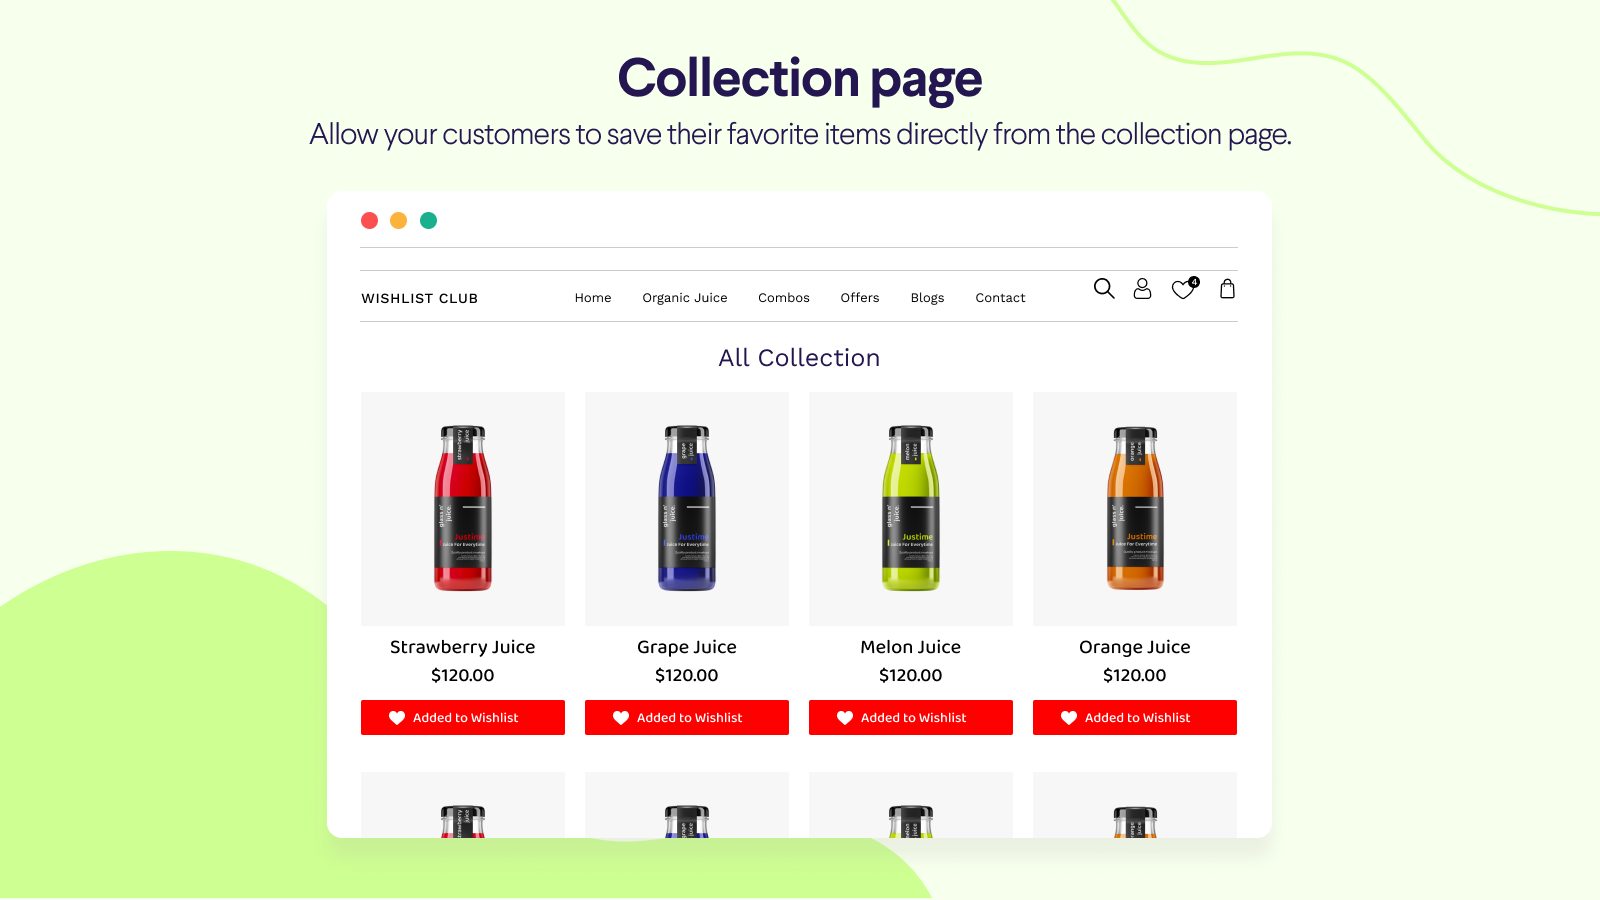 Engage customers by adding a wishlist icon on collection page.